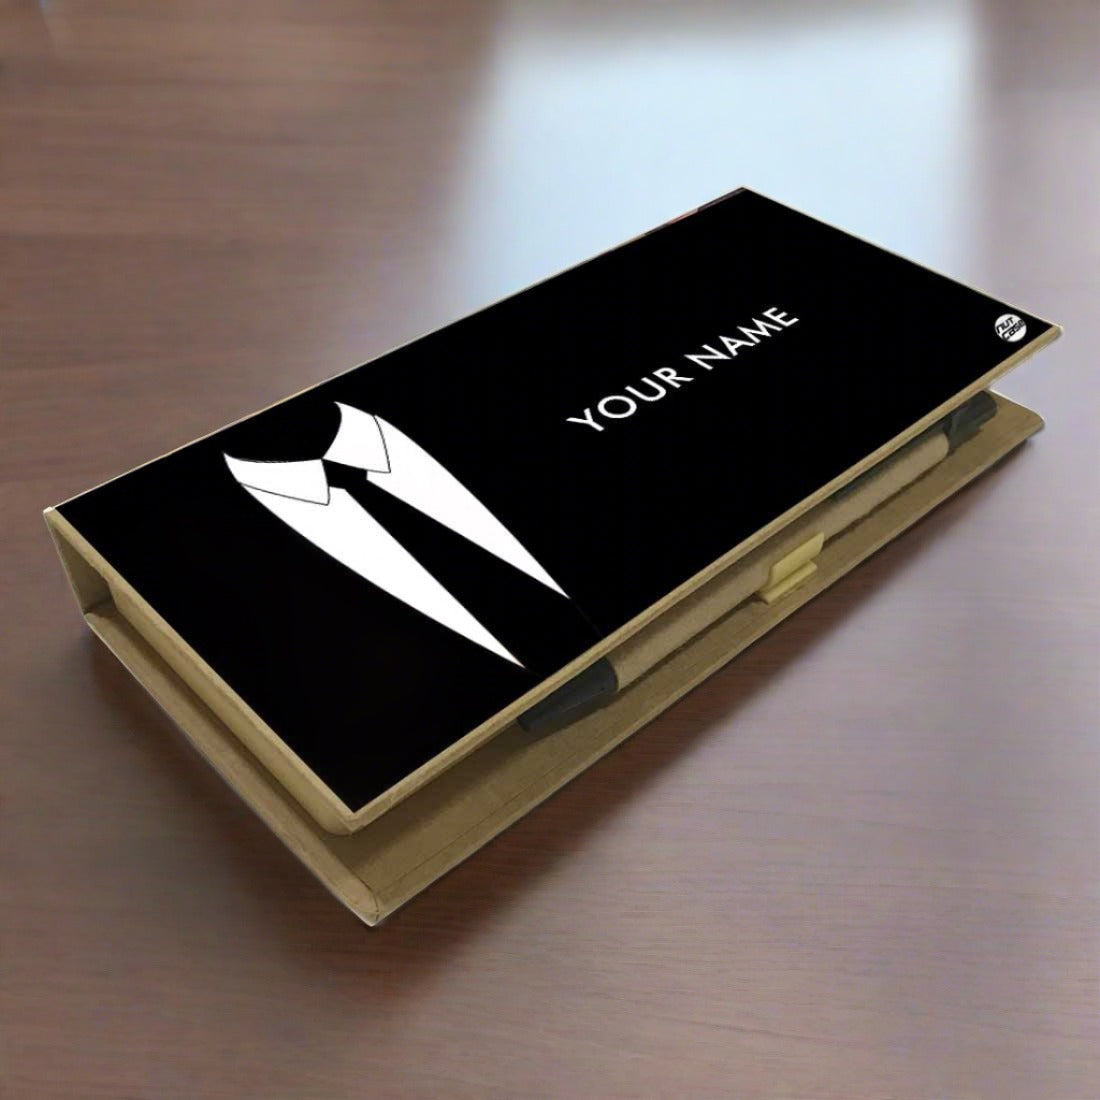 Personalized Stationery Kit for Office - Suit Up Nutcase